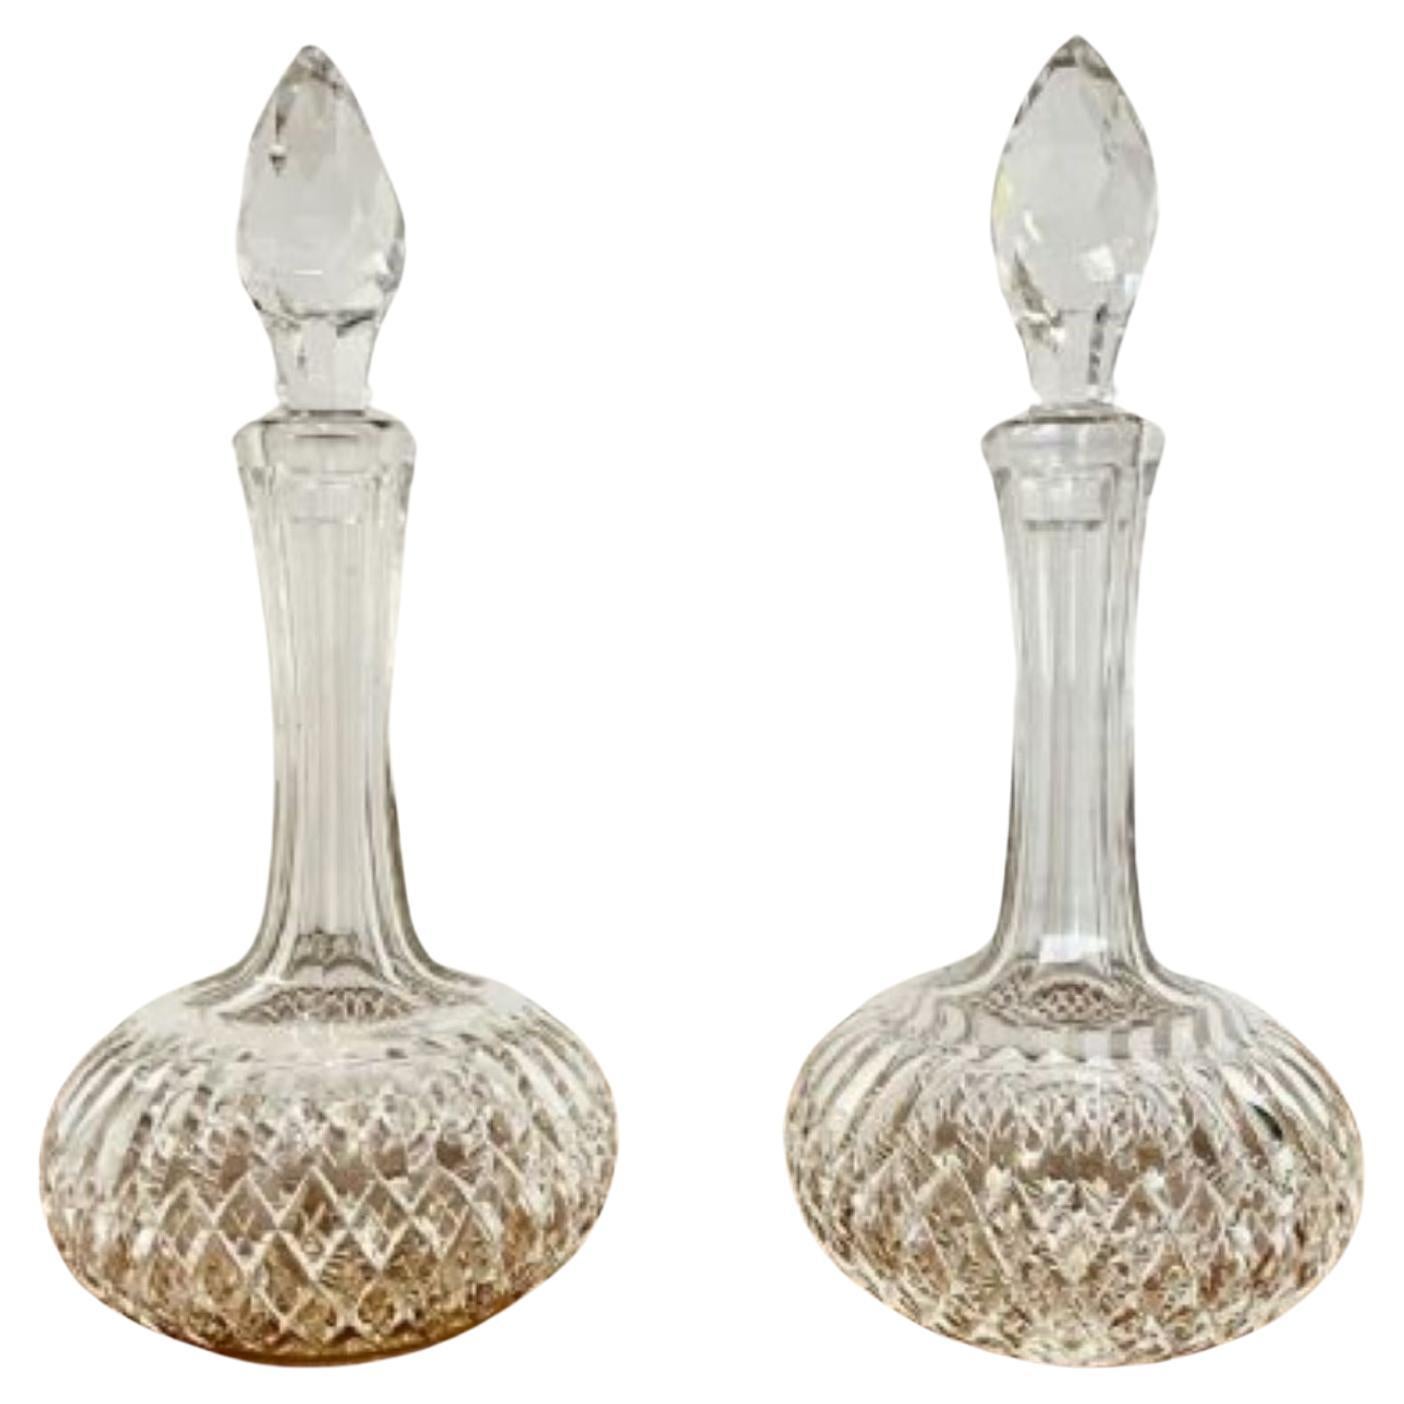 Pair of antique Edwardian cut glass decanters For Sale